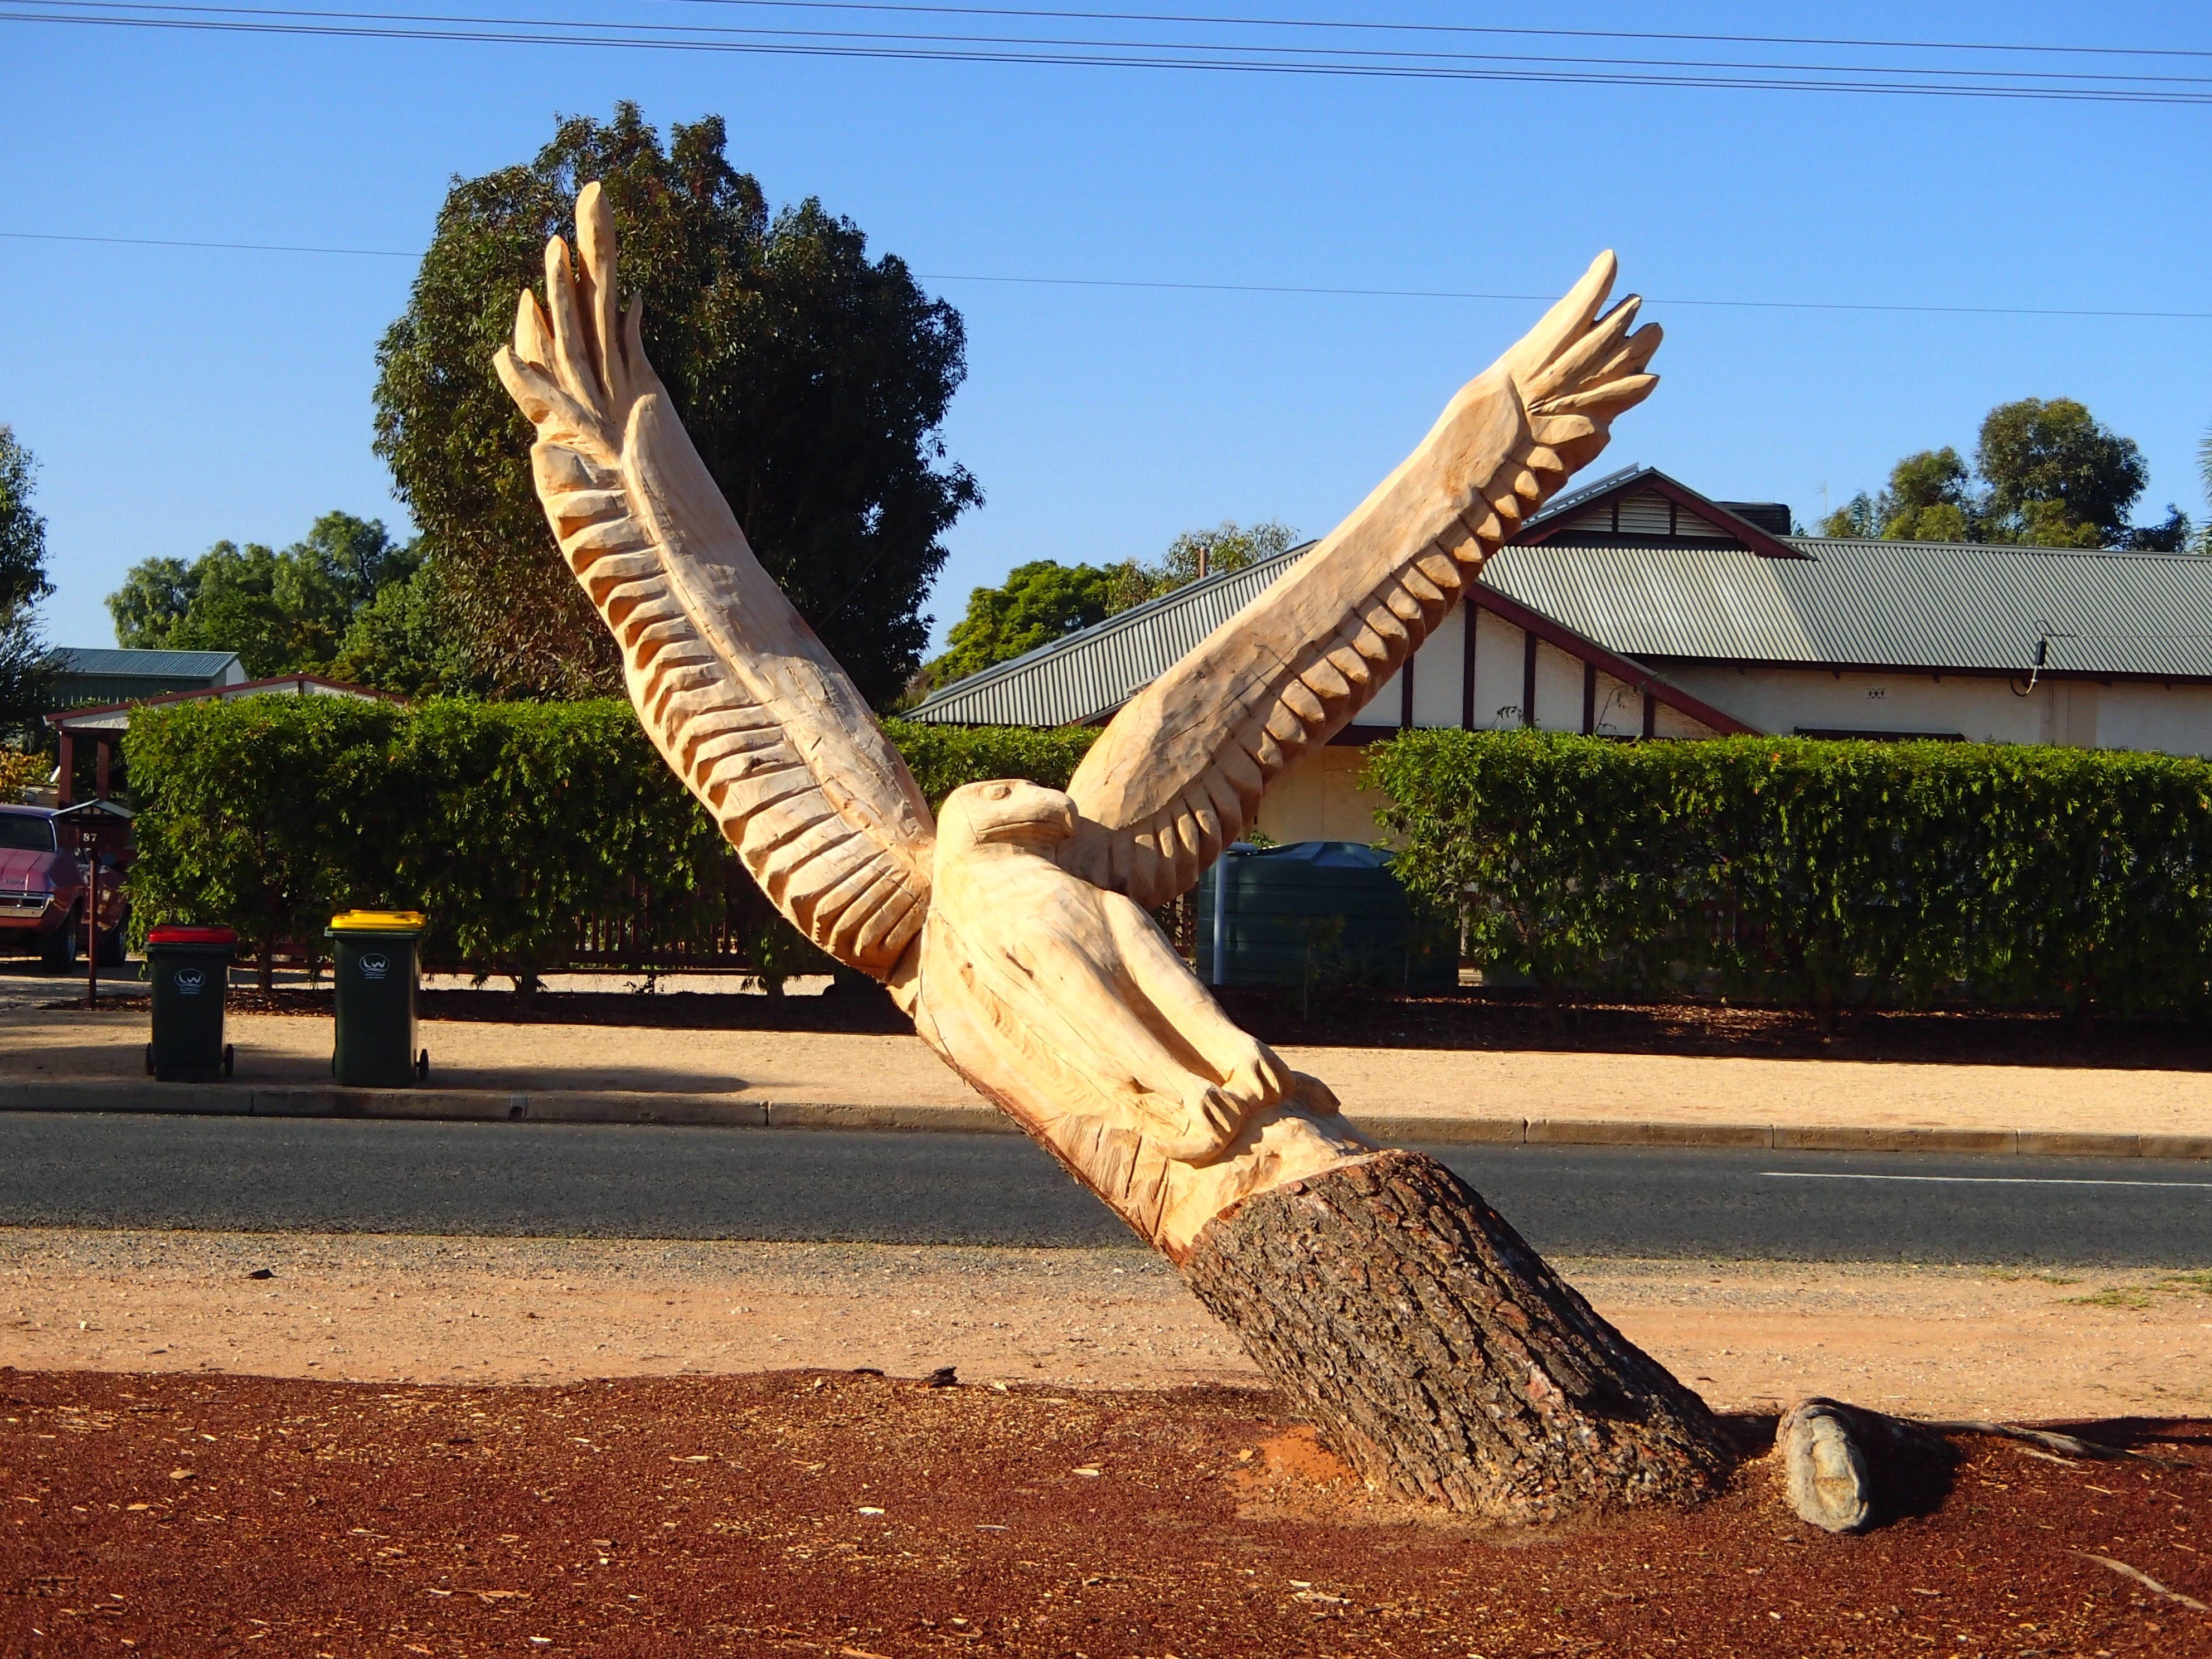 Loxton Tree sculptures - Attractions